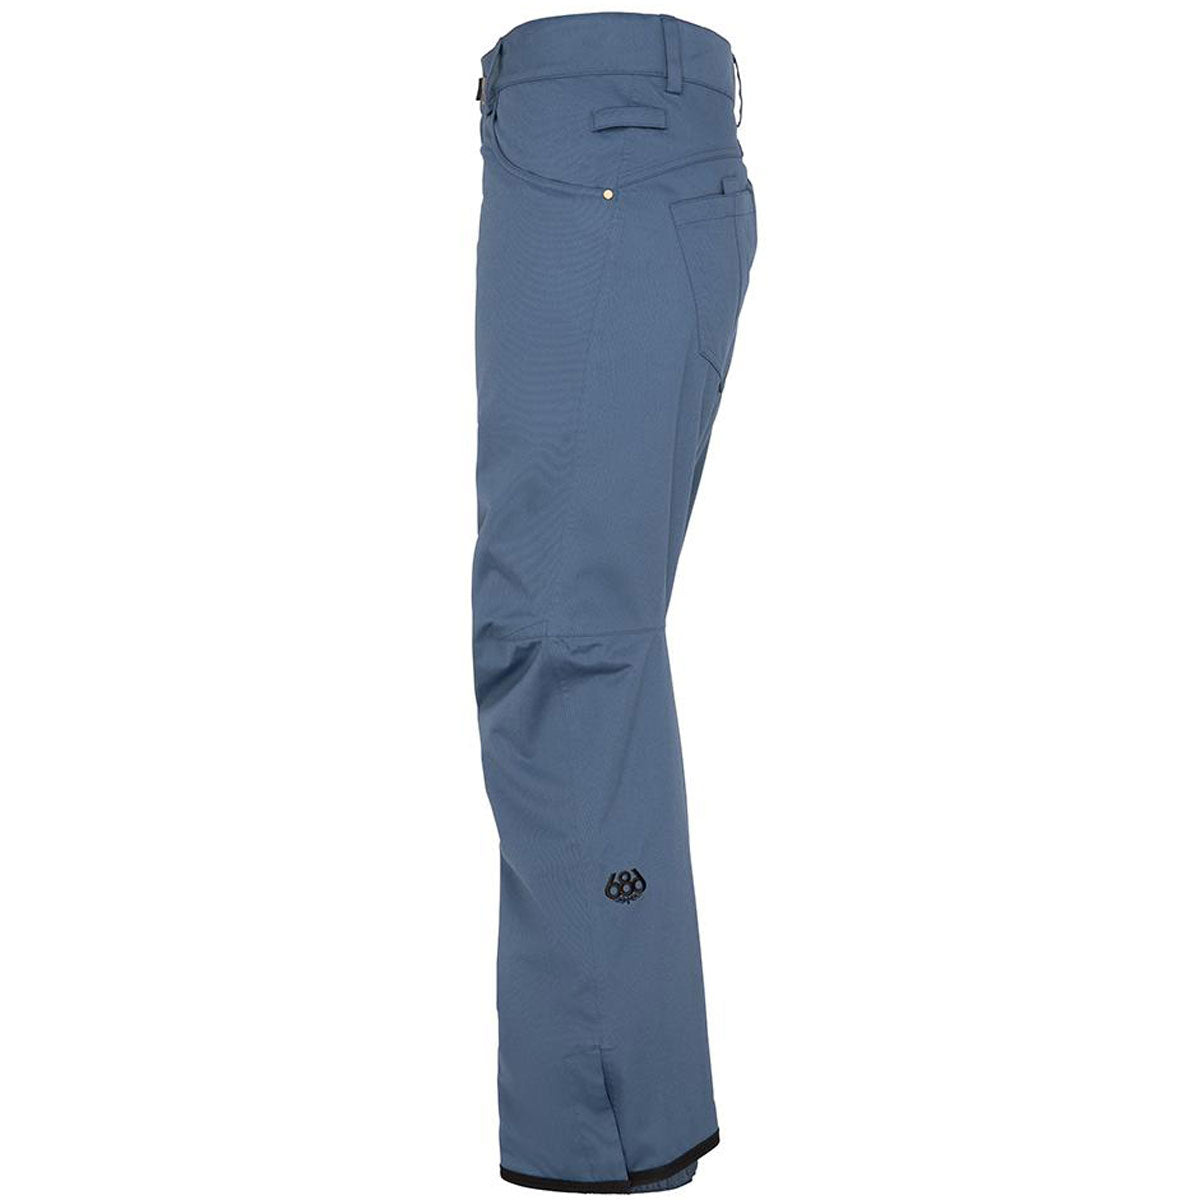 686 Womens Mid-Rise Insulated Snowboard Pants - Vintage Navy image 3